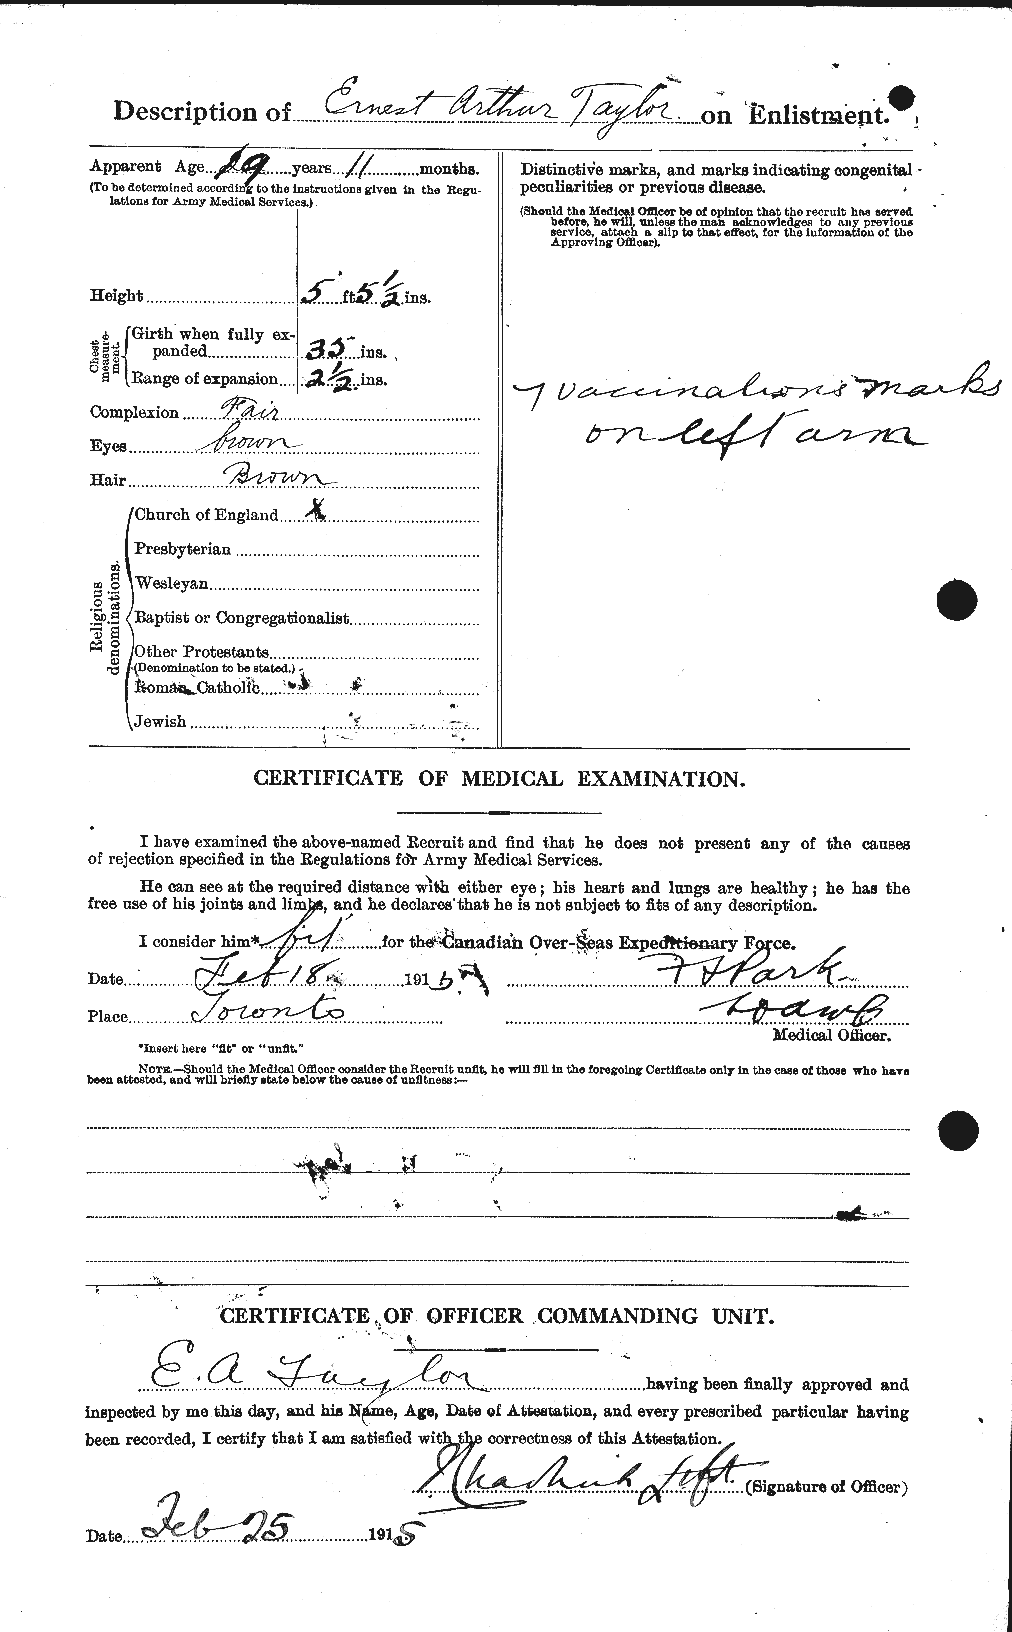 Personnel Records of the First World War - CEF 627388b